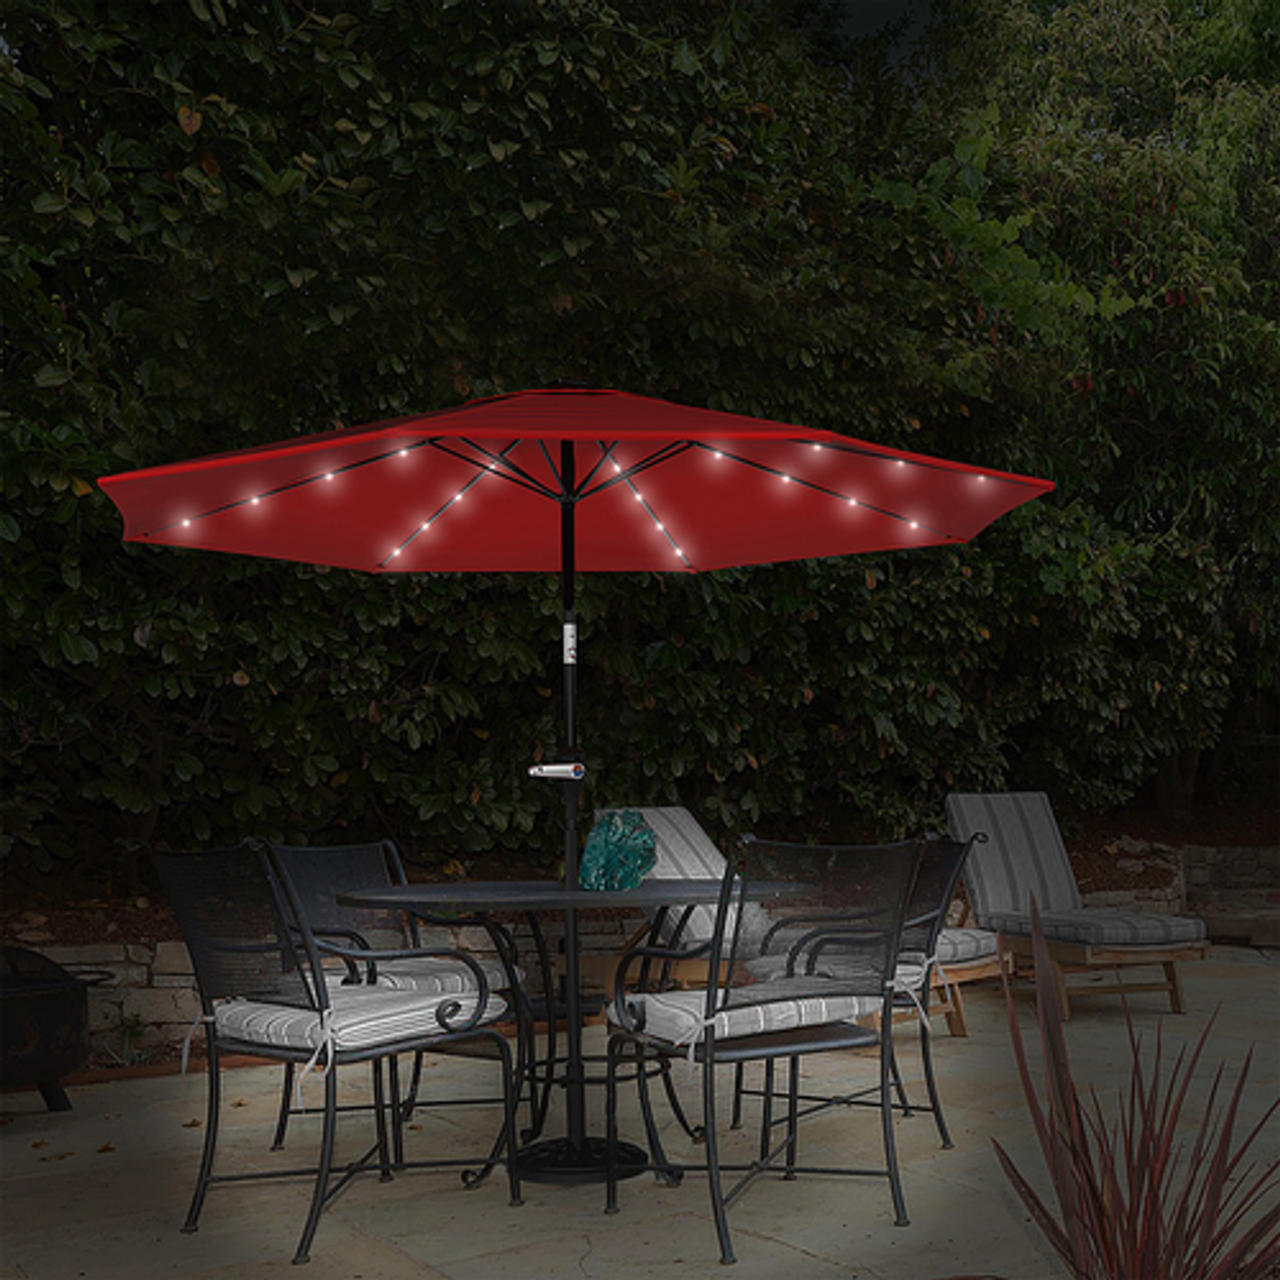 Nature Spring - Patio Umbrella – 10 Foot Deck Shade with Solar Powered LED Lights, Crank Tilt and Fade Resistant, UV Protection Canopy - Crimson Red